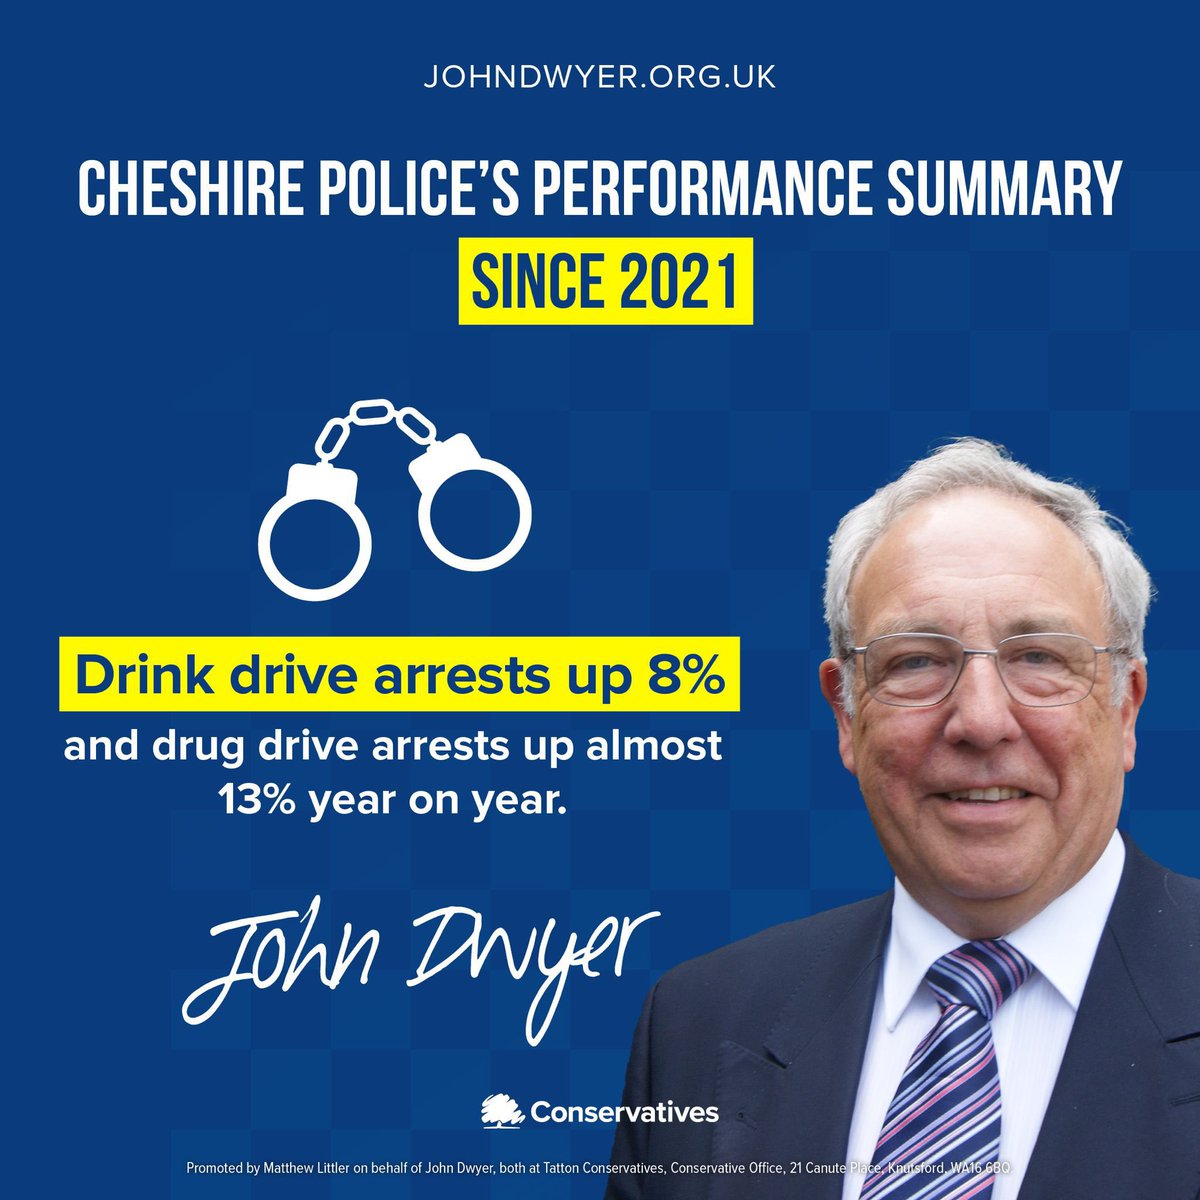 This week @cwaclabour want you to elect their candidate, @danpricelab, for #Police & #Crime Commissioner in #Cheshire but he won’t tell us his view on a former Labour councillor recently convicted of drink driving. Neither will @weezegee @MikeAmesburyMP @CllrKarenShore #shameful